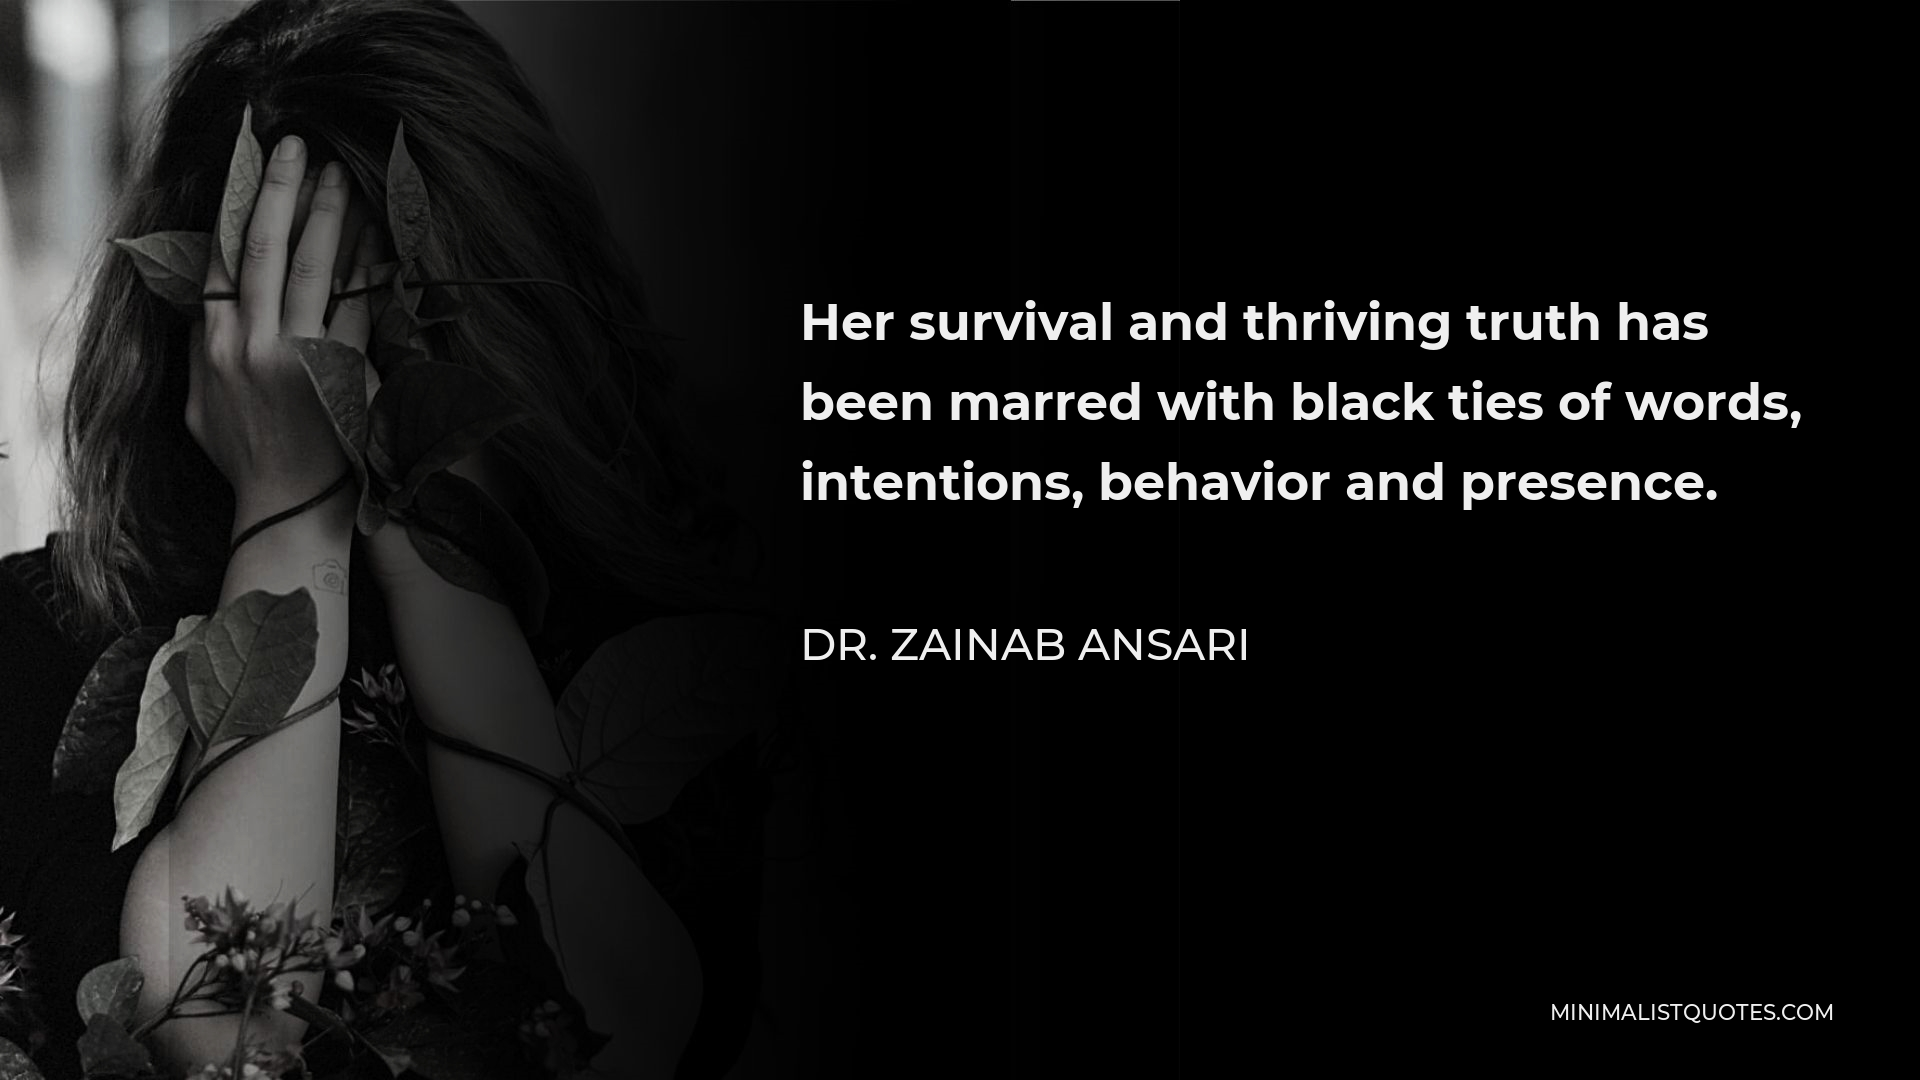 Dr. Zainab Ansari Quote - Her survival and thriving truth has been marred with black ties of words, intentions, behavior and presence.